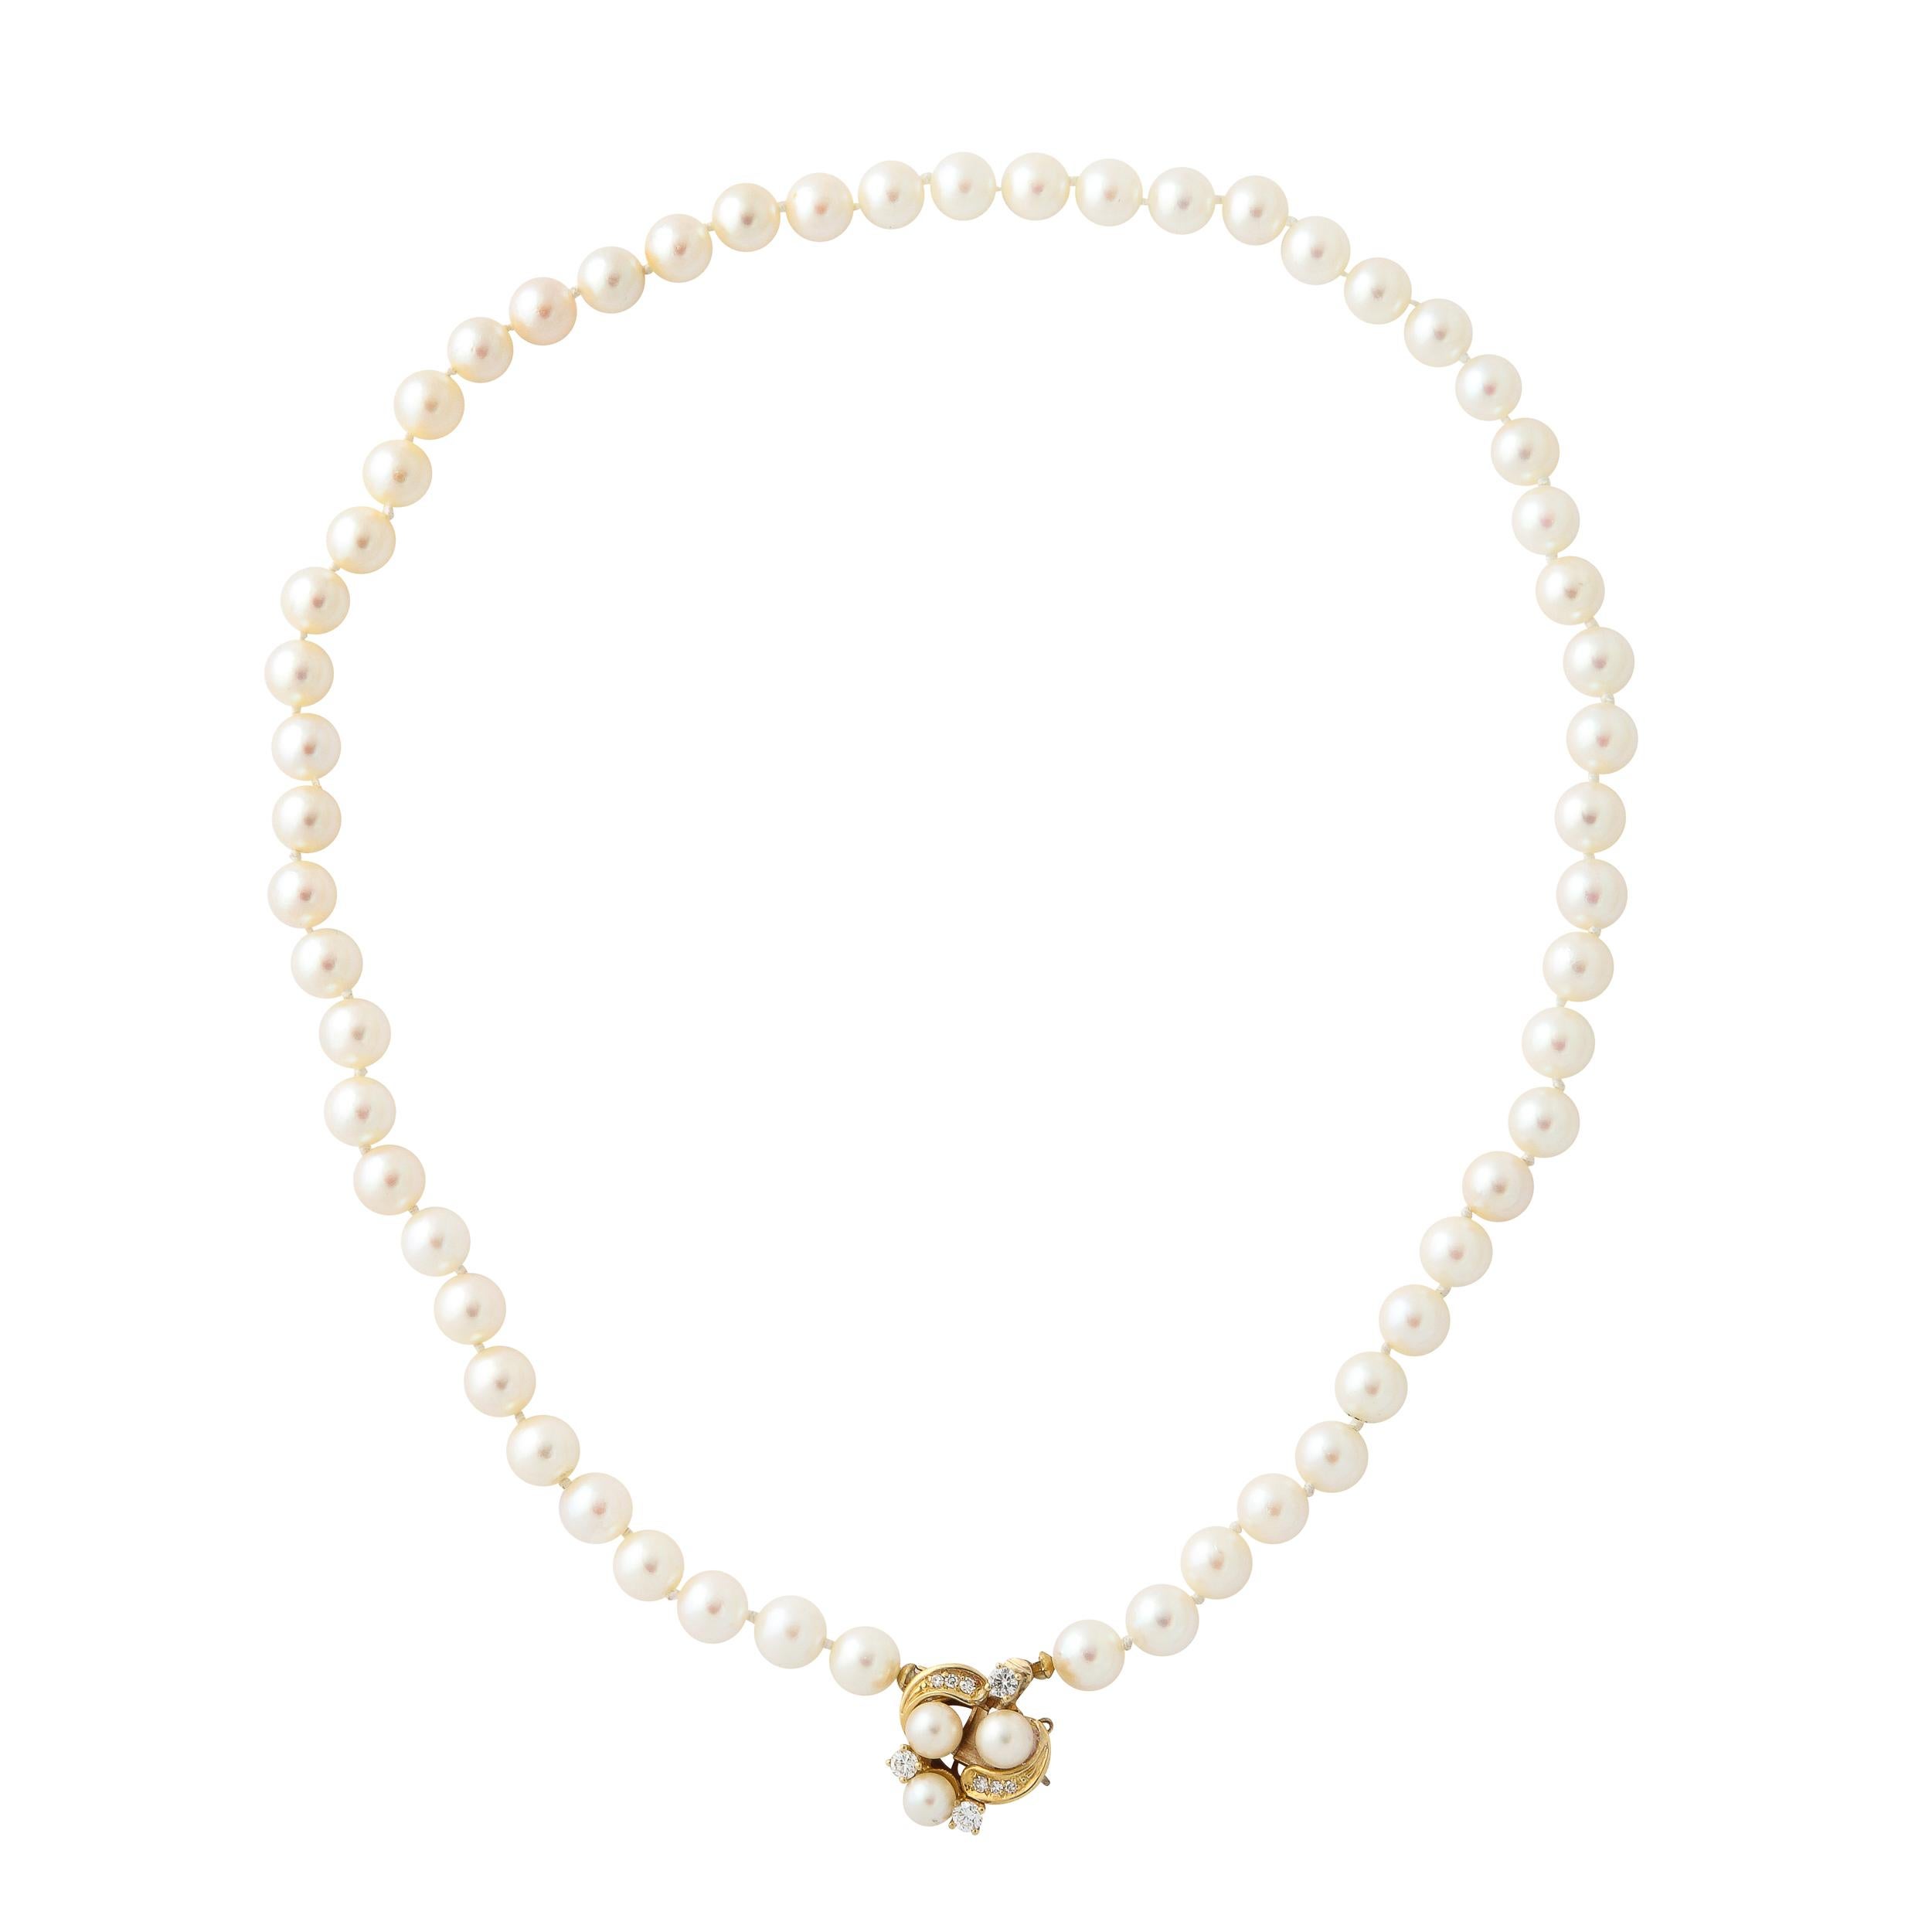 Modernist Pearl Necklace with 14k  Gold , Diamond and Pearl Clasp  1